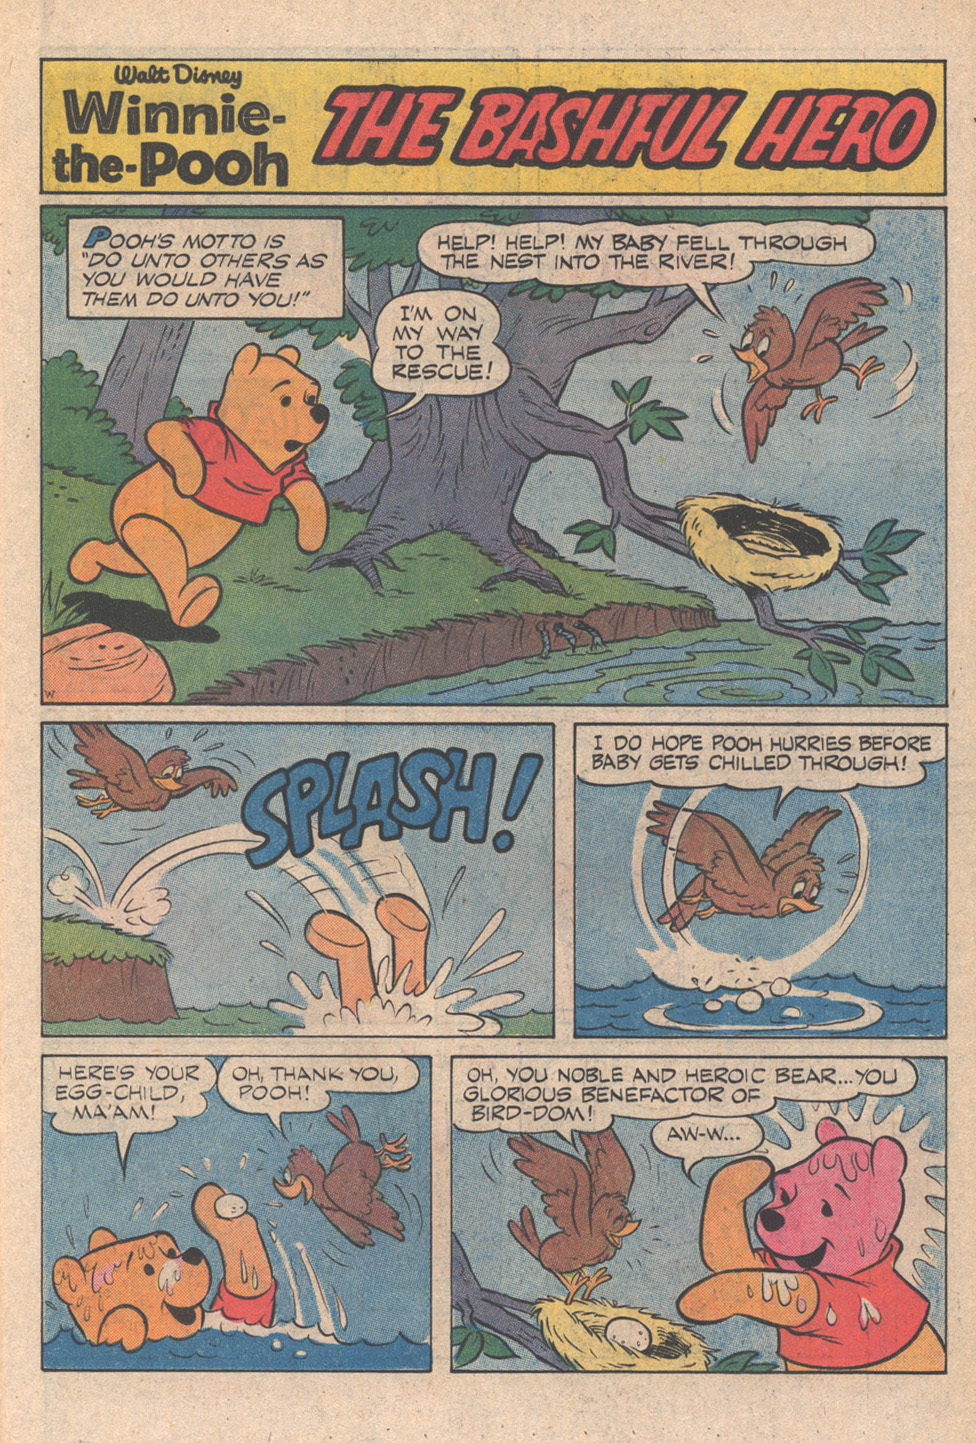 Read online Winnie-the-Pooh comic -  Issue #7 - 11